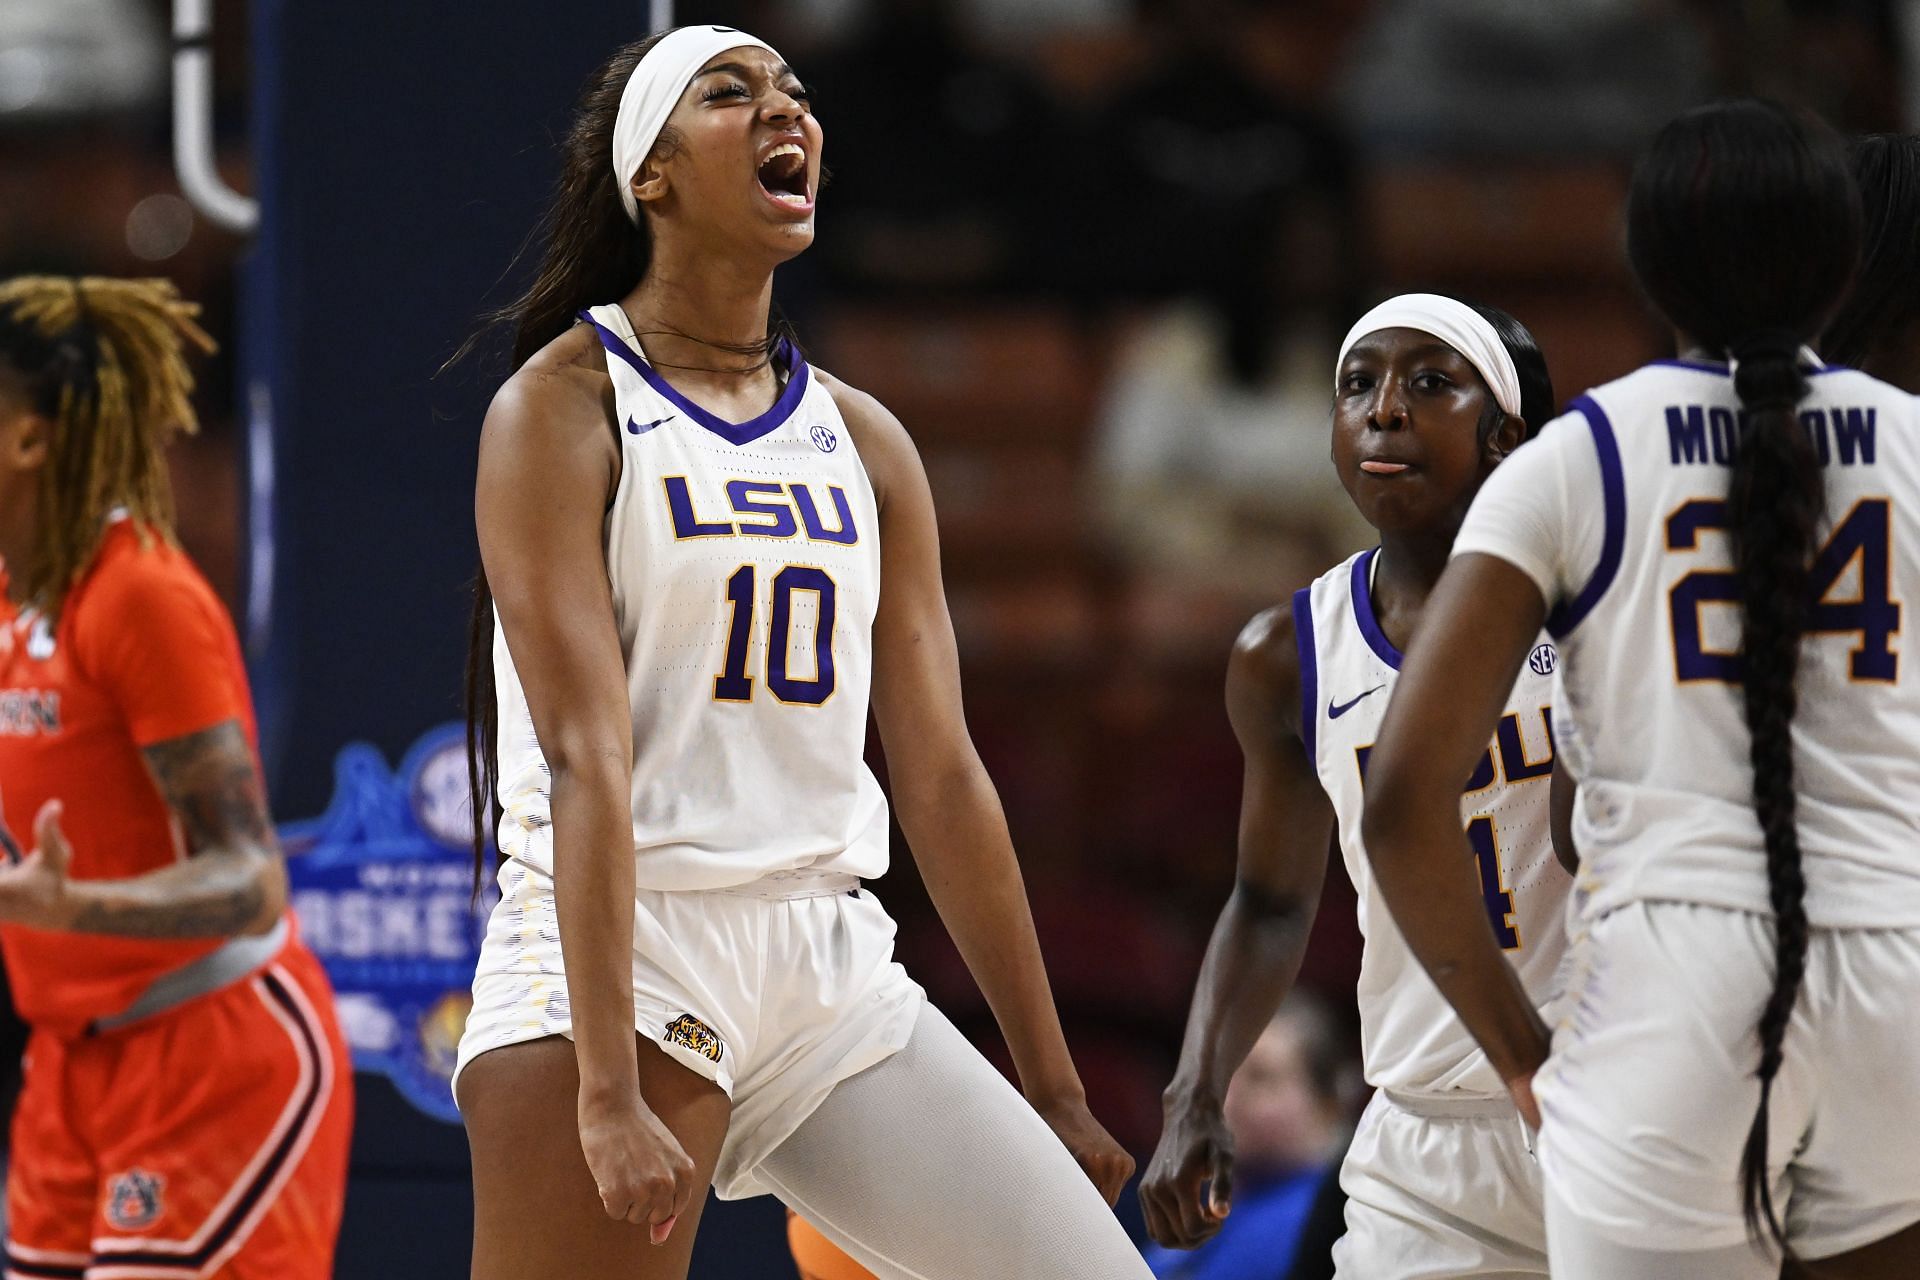 GREENVILLE, SOUTH CAROLINA - MARCH 08: Angel Reese #10 of the LSU Lady Tigers celebrates against the Auburn Tigers in the first quarter during the quarterfinals of the SEC Women&#039;s Basketball Tournament at Bon Secours Wellness Arena on March 08, 2024 in Greenville, South Carolina. (Photo by Eakin Howard/Getty Images)